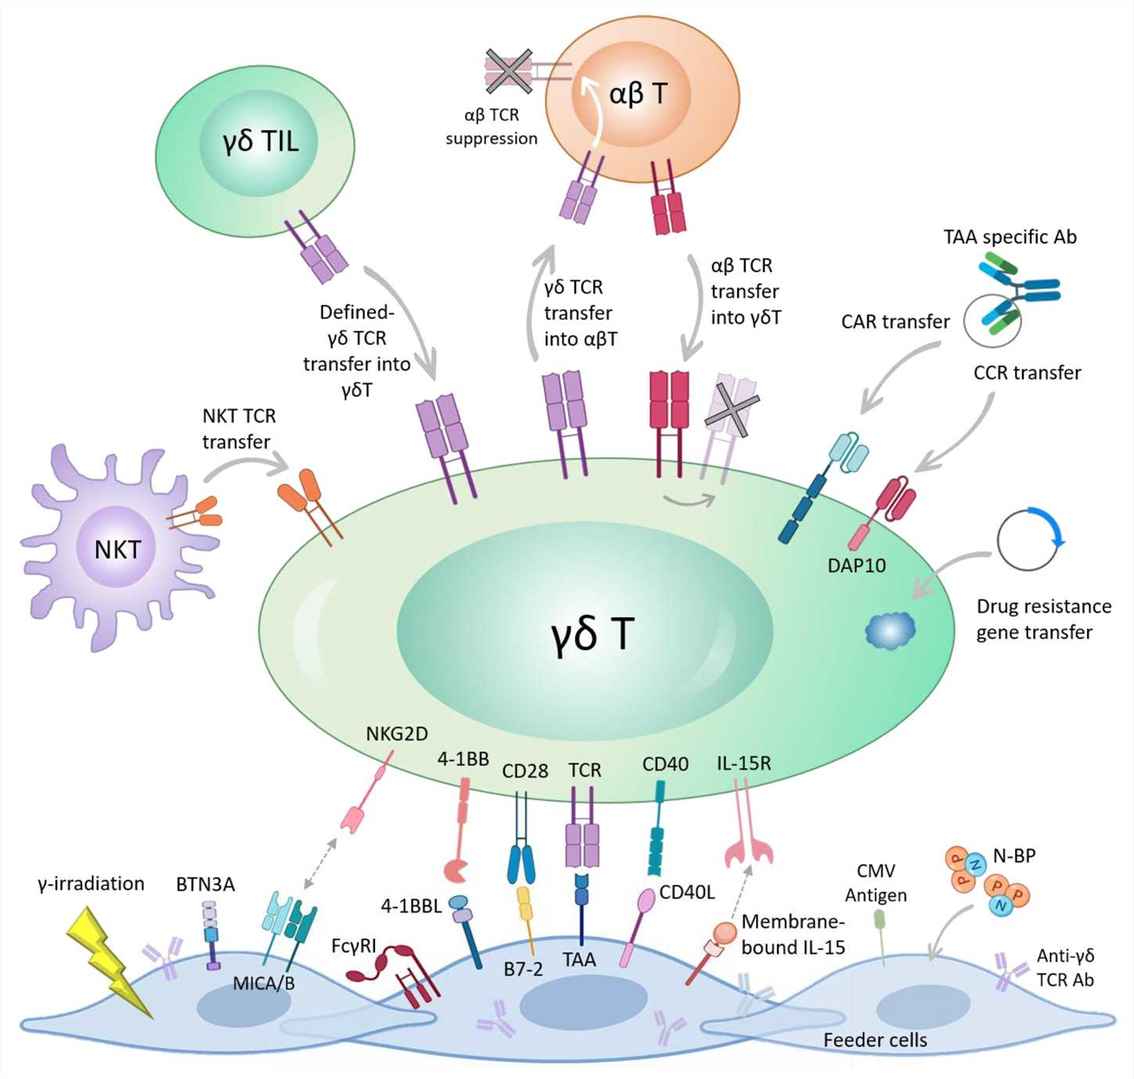 Different genetic engineering strategies for harnessing the anti-tumor activity of γδ T cells.